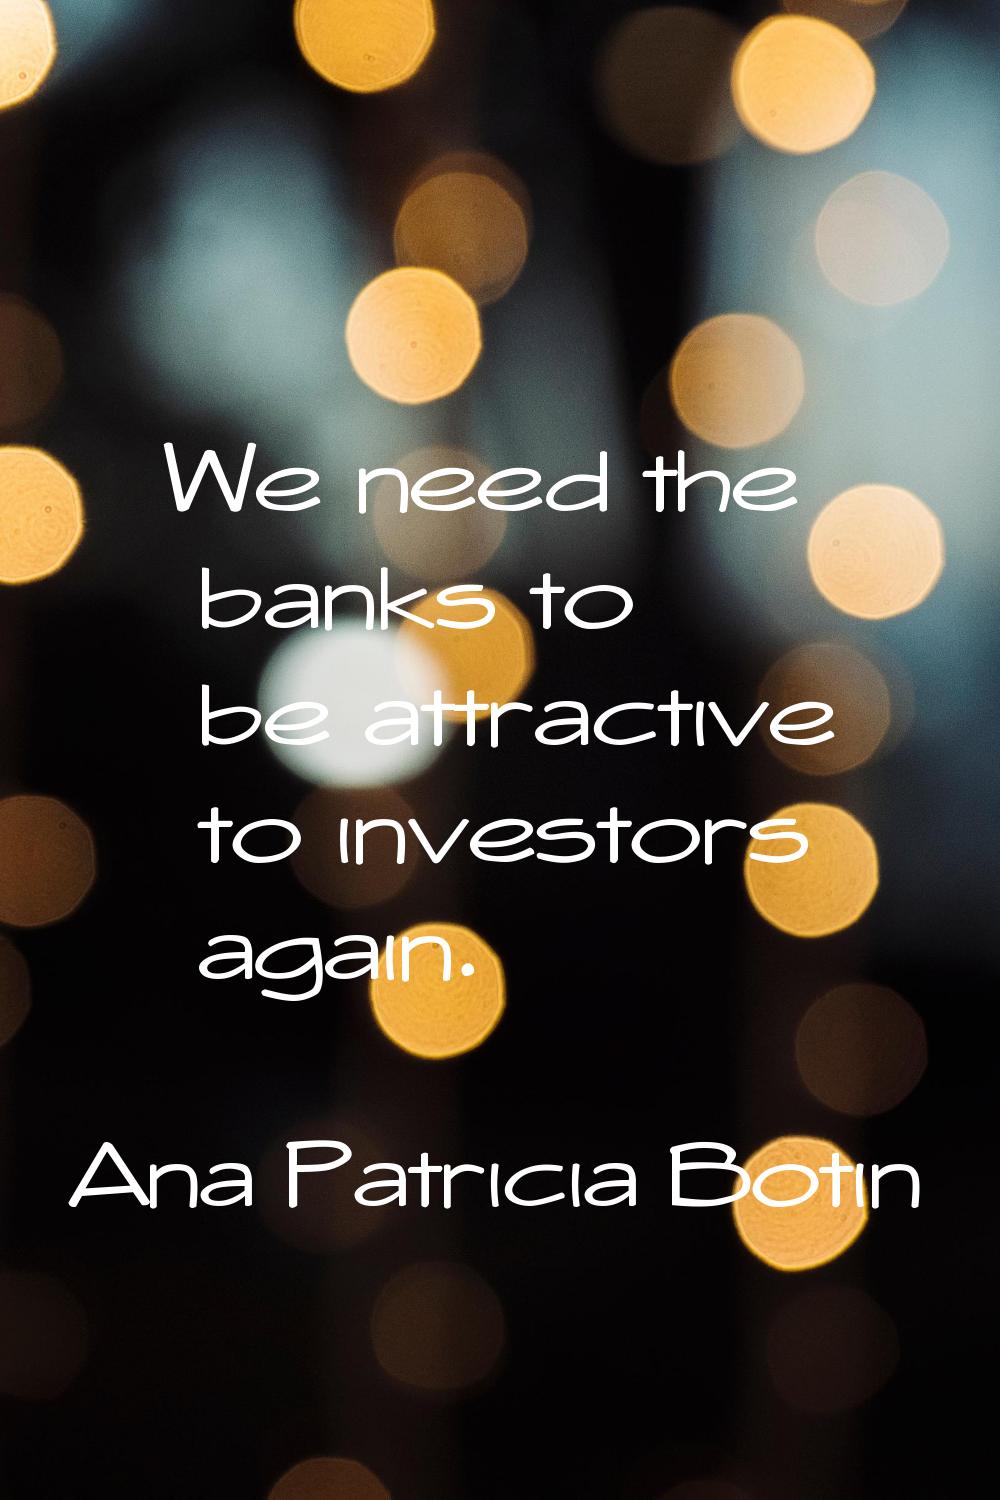 We need the banks to be attractive to investors again.